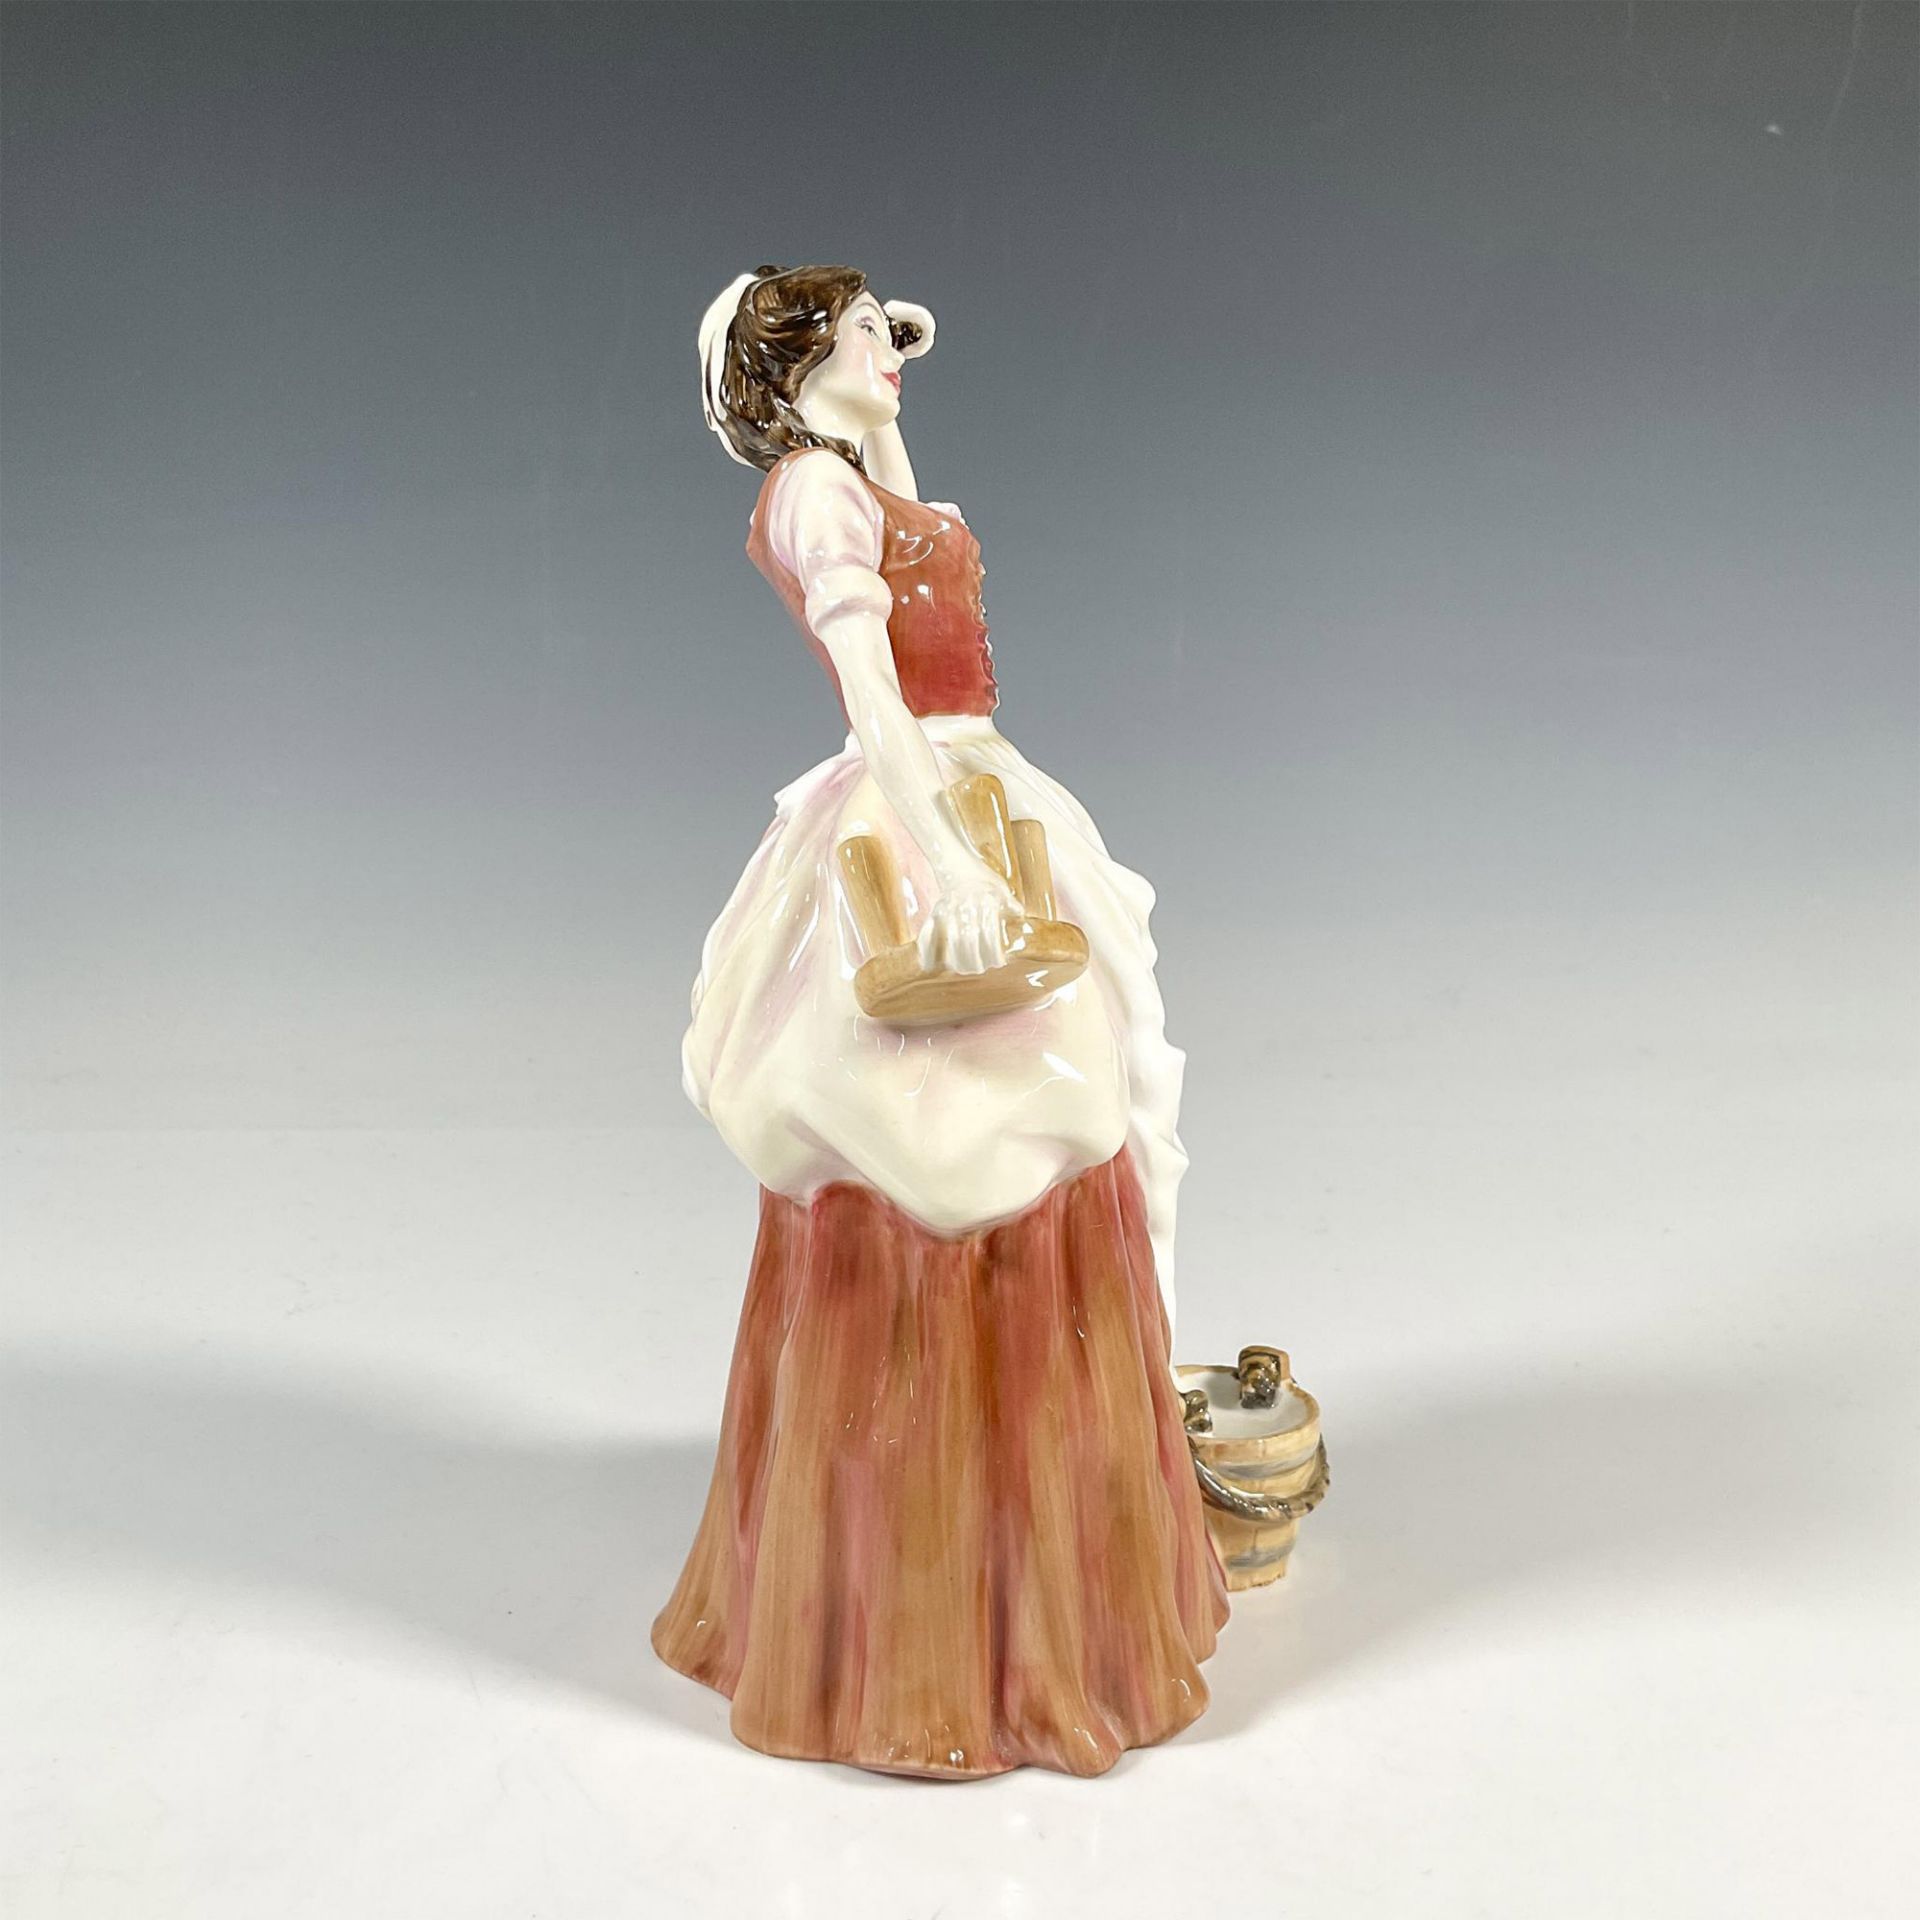 Tess of the D'Urbervilles HN3846 - Royal Doulton Figurine - Image 4 of 5